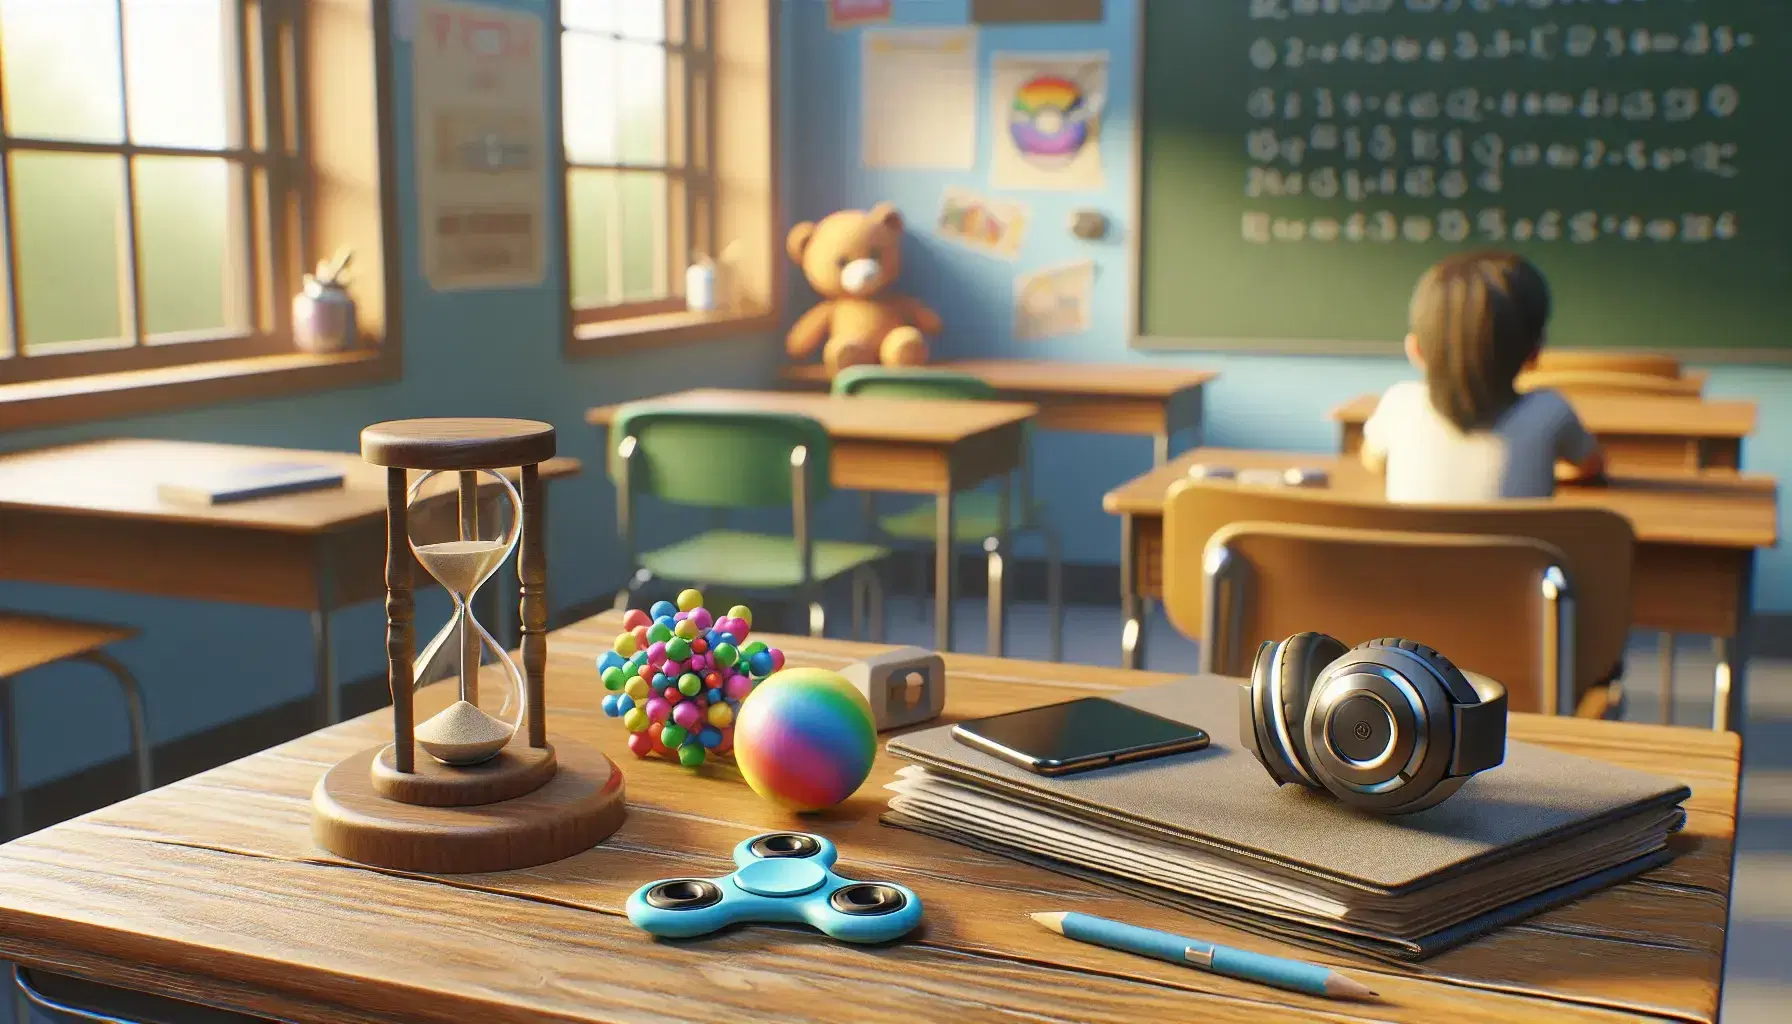 Cluttered wooden desk in classroom with natural light, various objects such as spinner, stress ball, hourglass and headphones, light blue background.